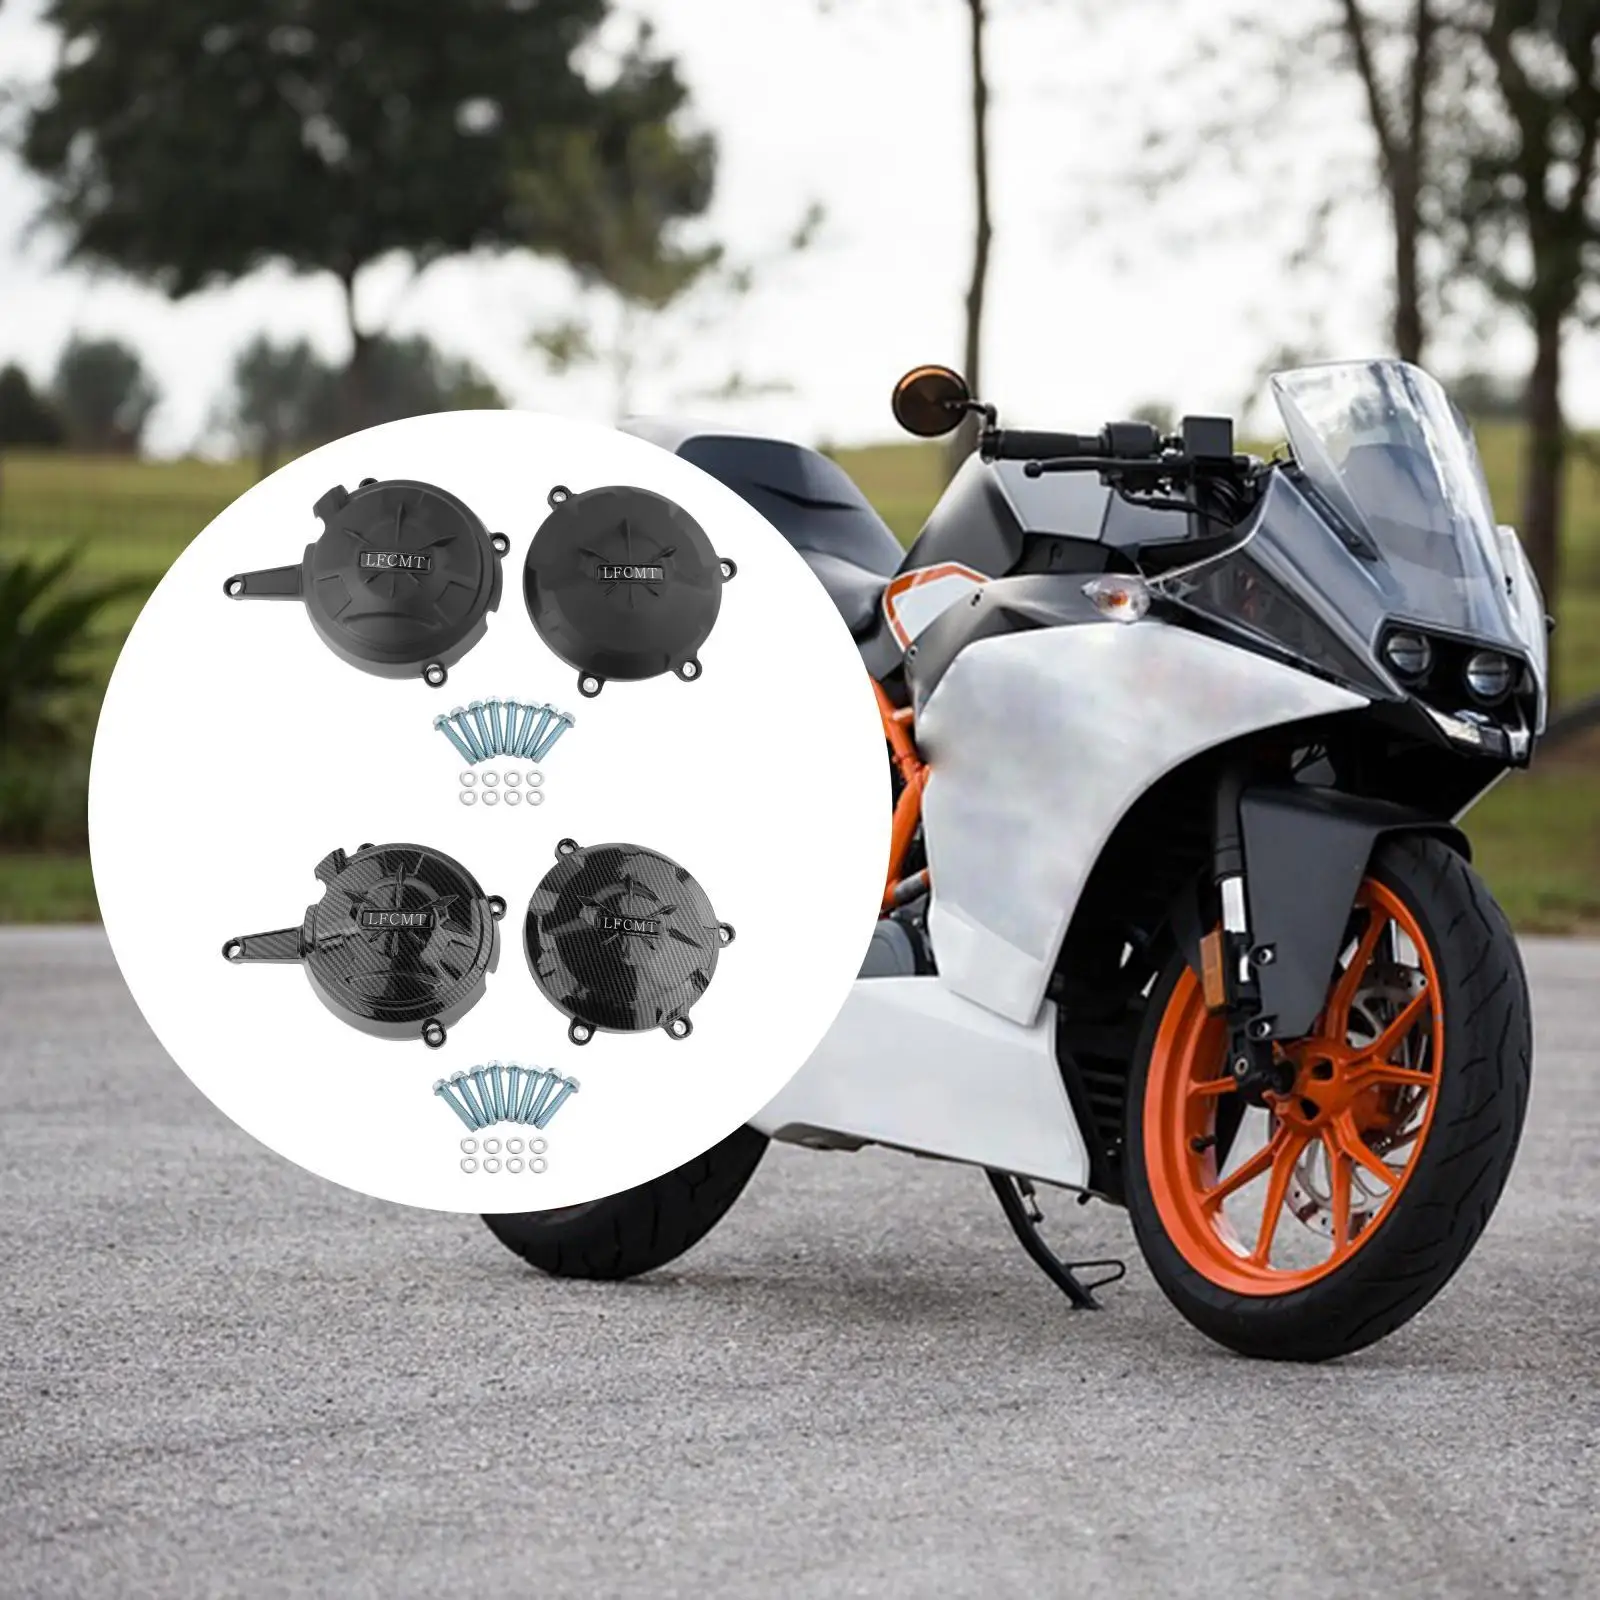 Motorcycles Engine Case Cover Kit Protective Protectors Frames Guards Kit Fit for Ducati 1199 1299 Panigale 12-20 Fittings